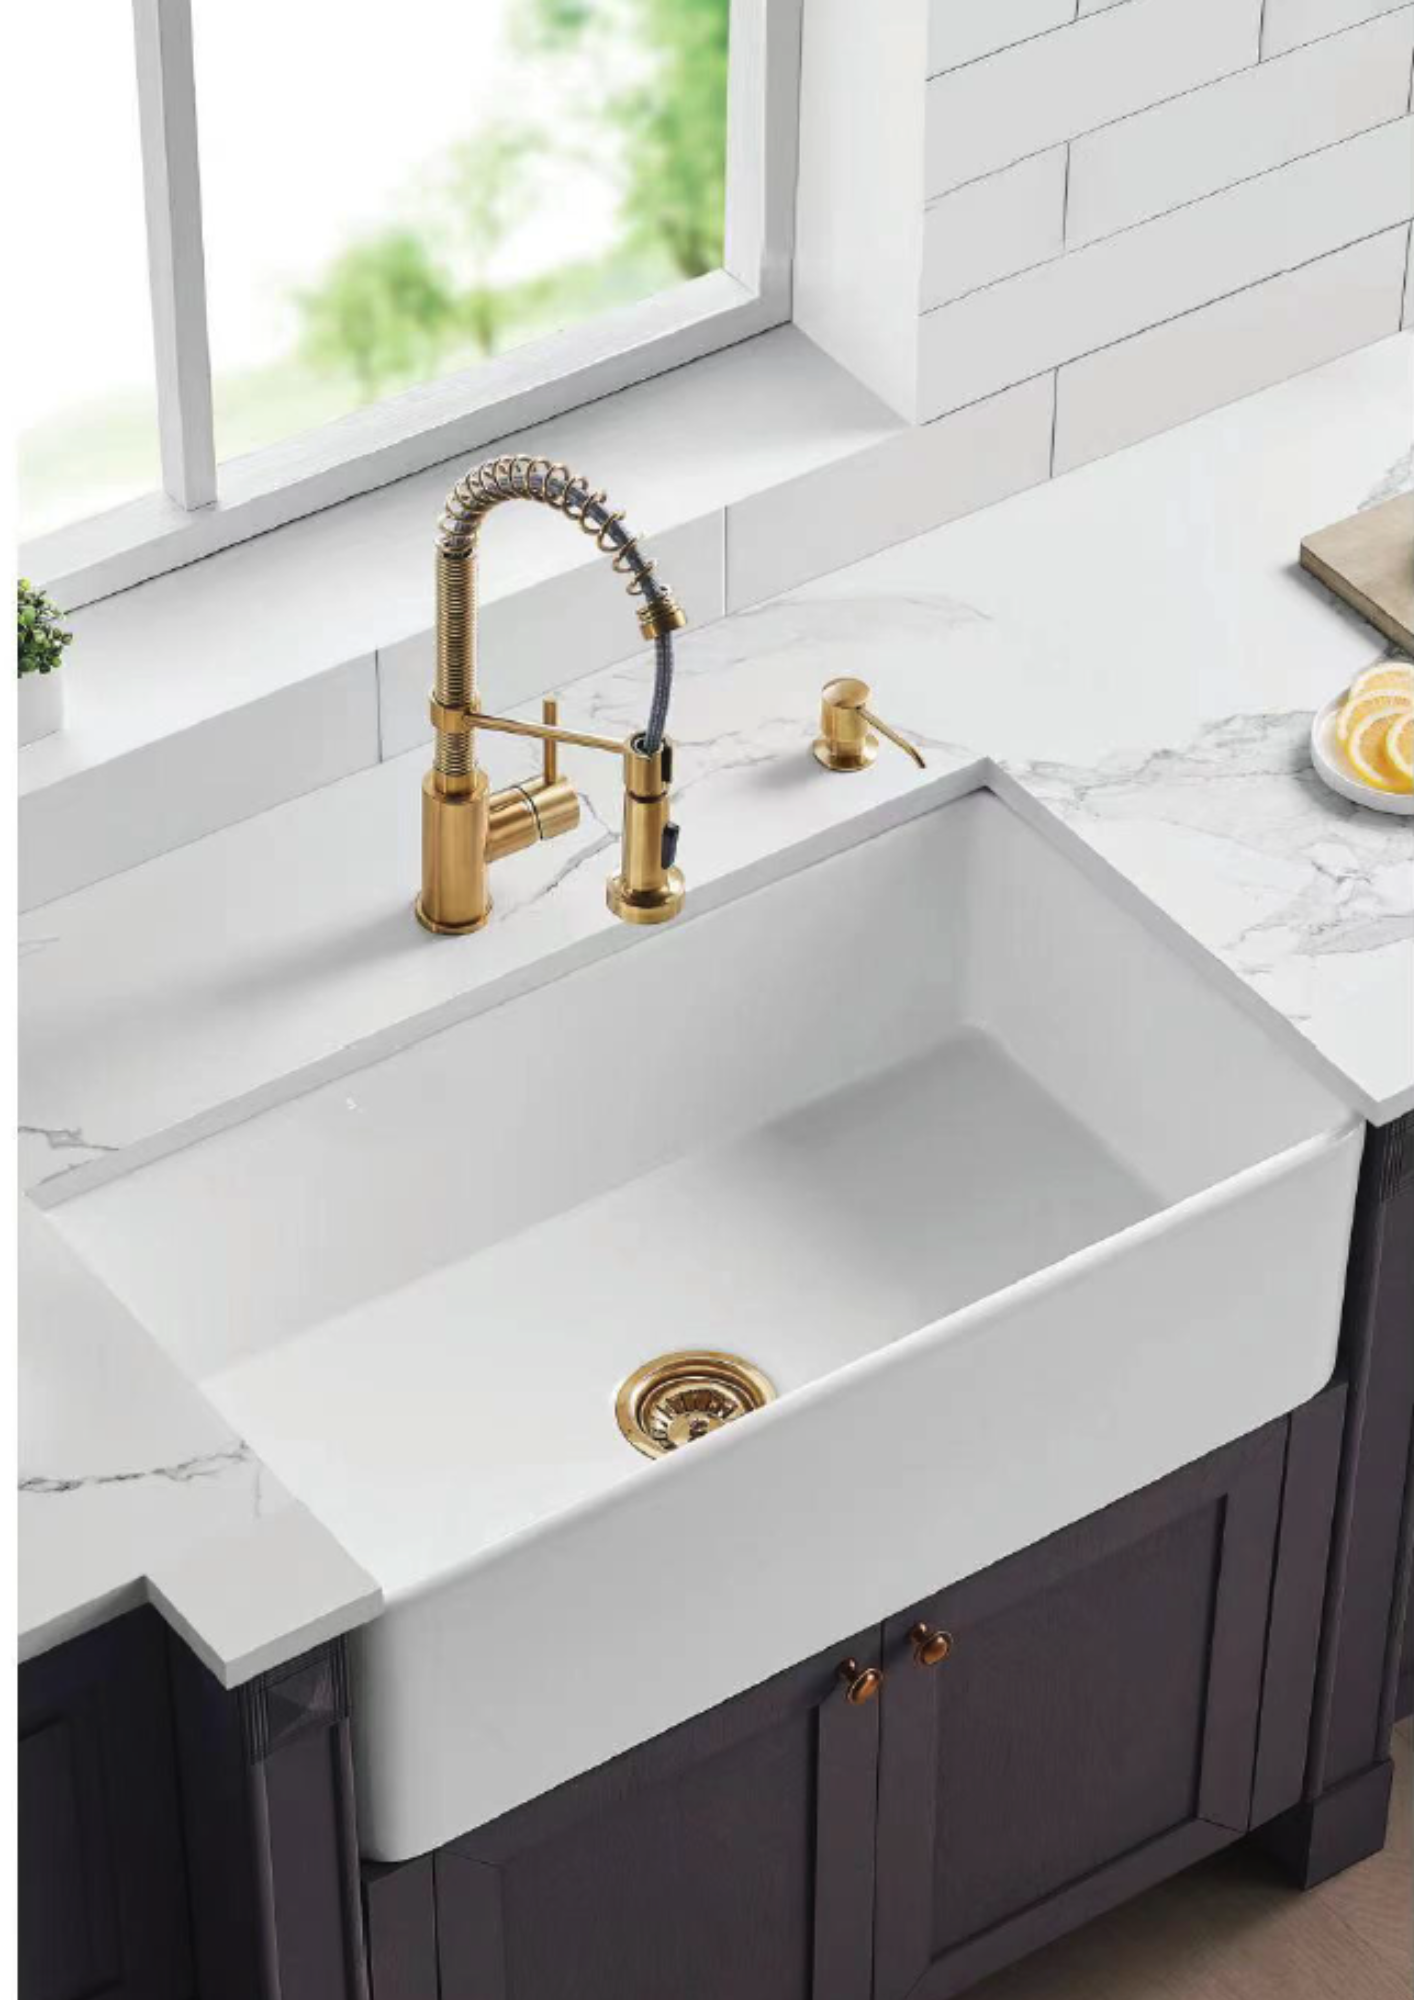 Traditional Fireclay Butlers Sink Oversized White 758mm - TK3018